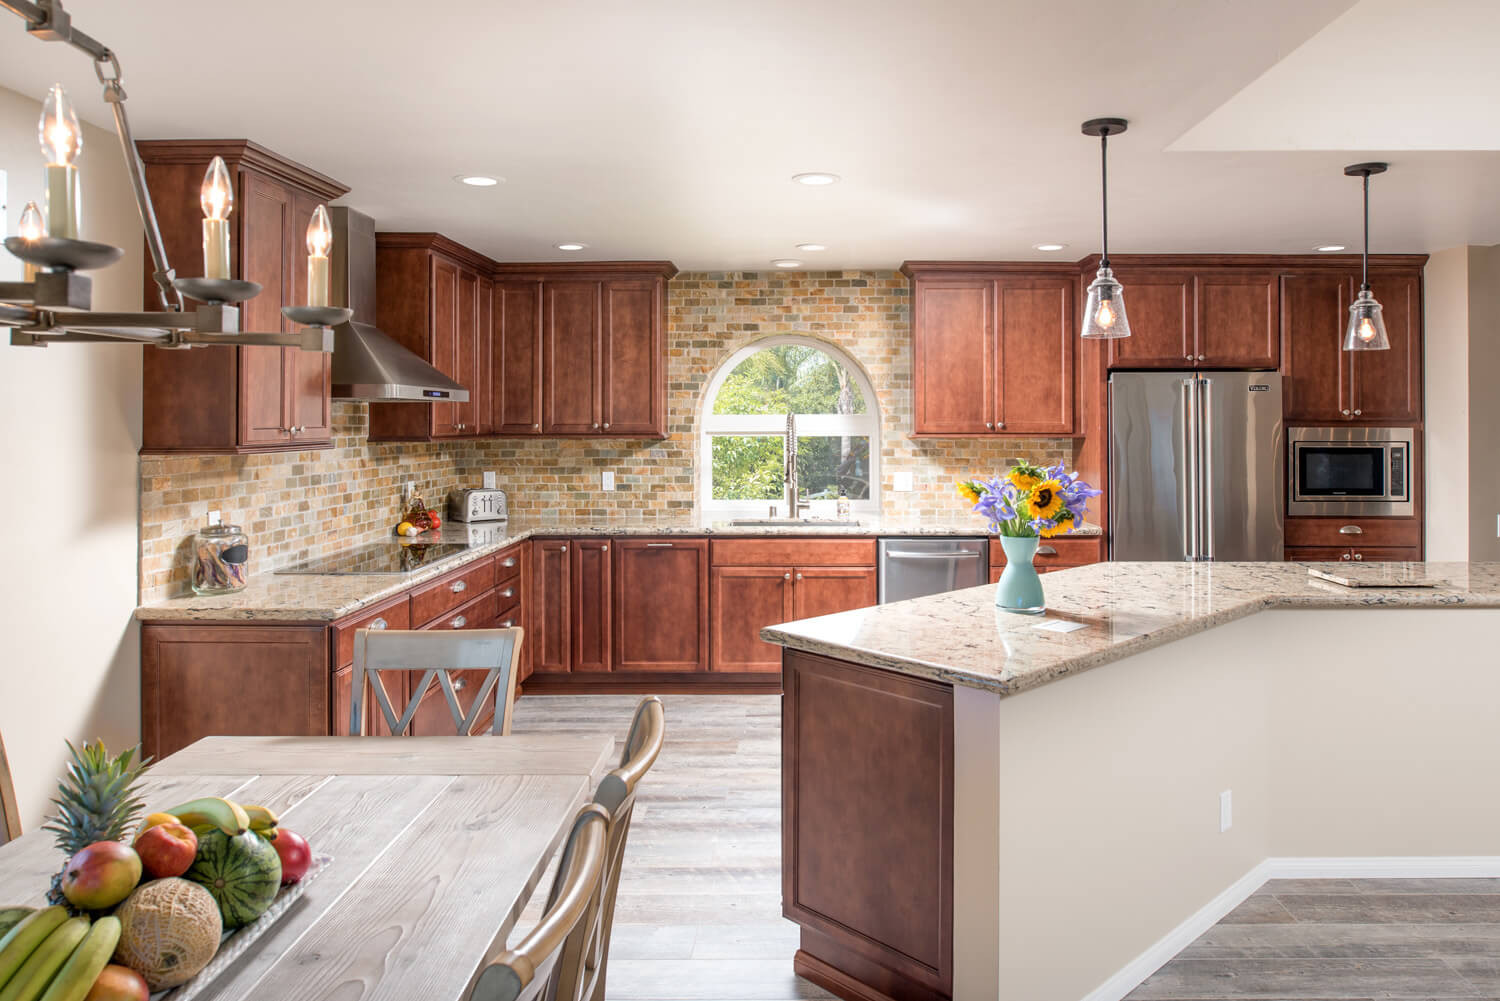 Kitchen Remodeling Contractor San Diego
 Design build services